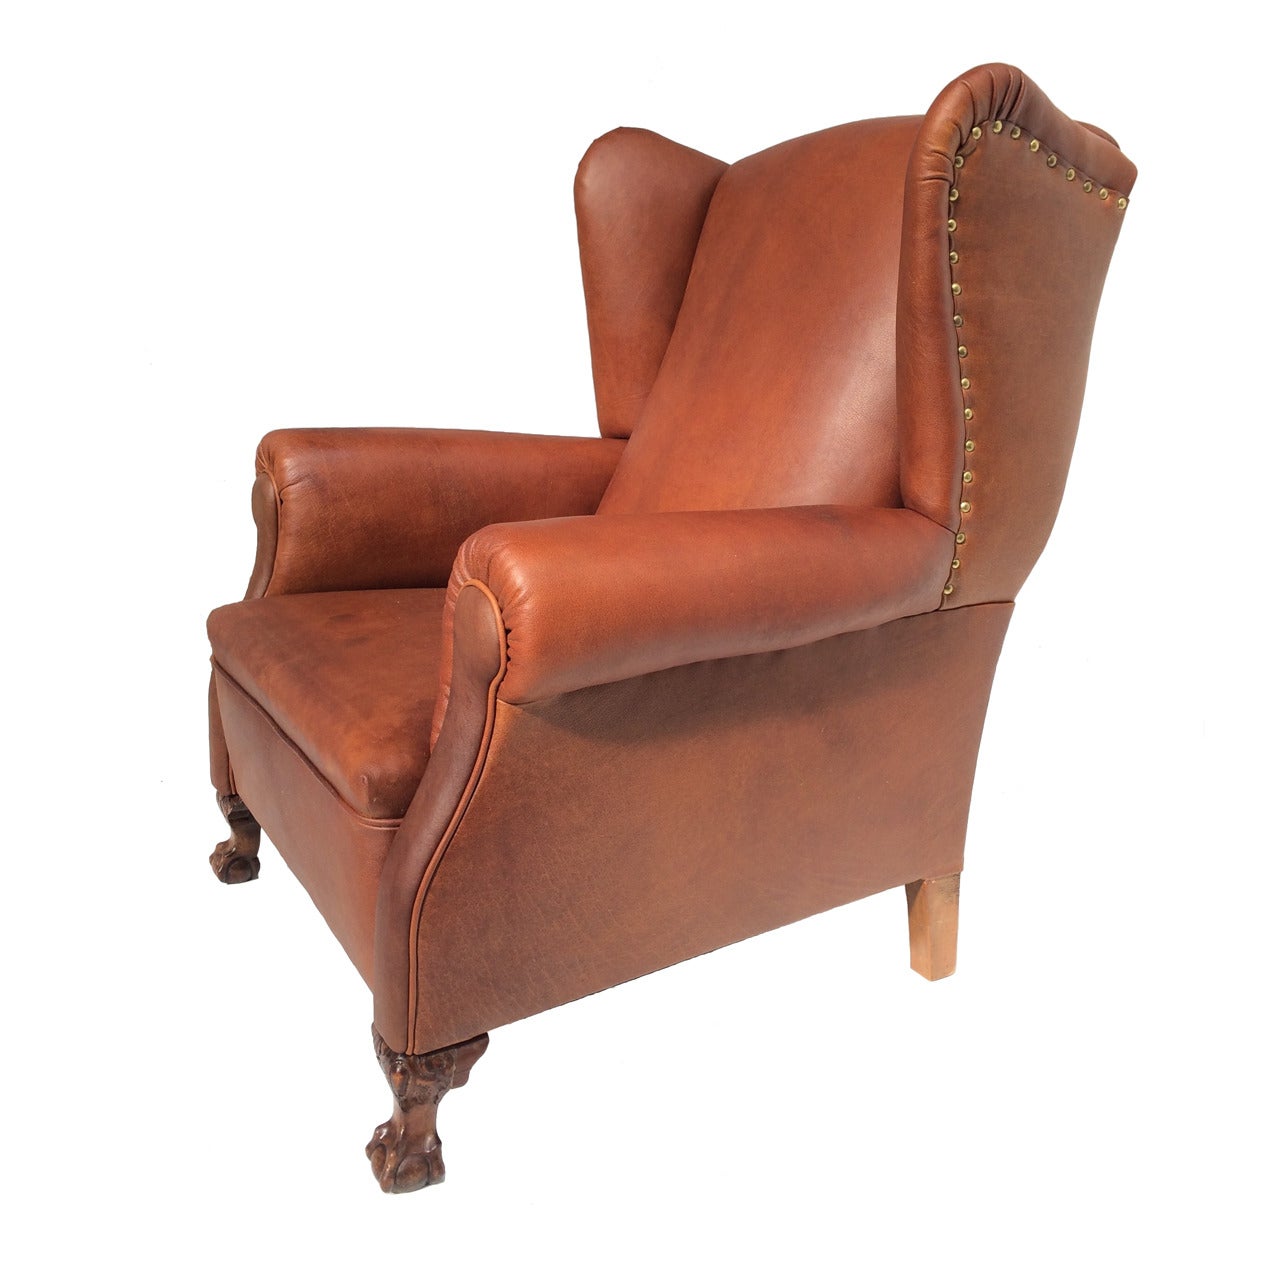 Very Comfortable Neo Gothic 'Griffin Talon' vintage leather Wingback chair